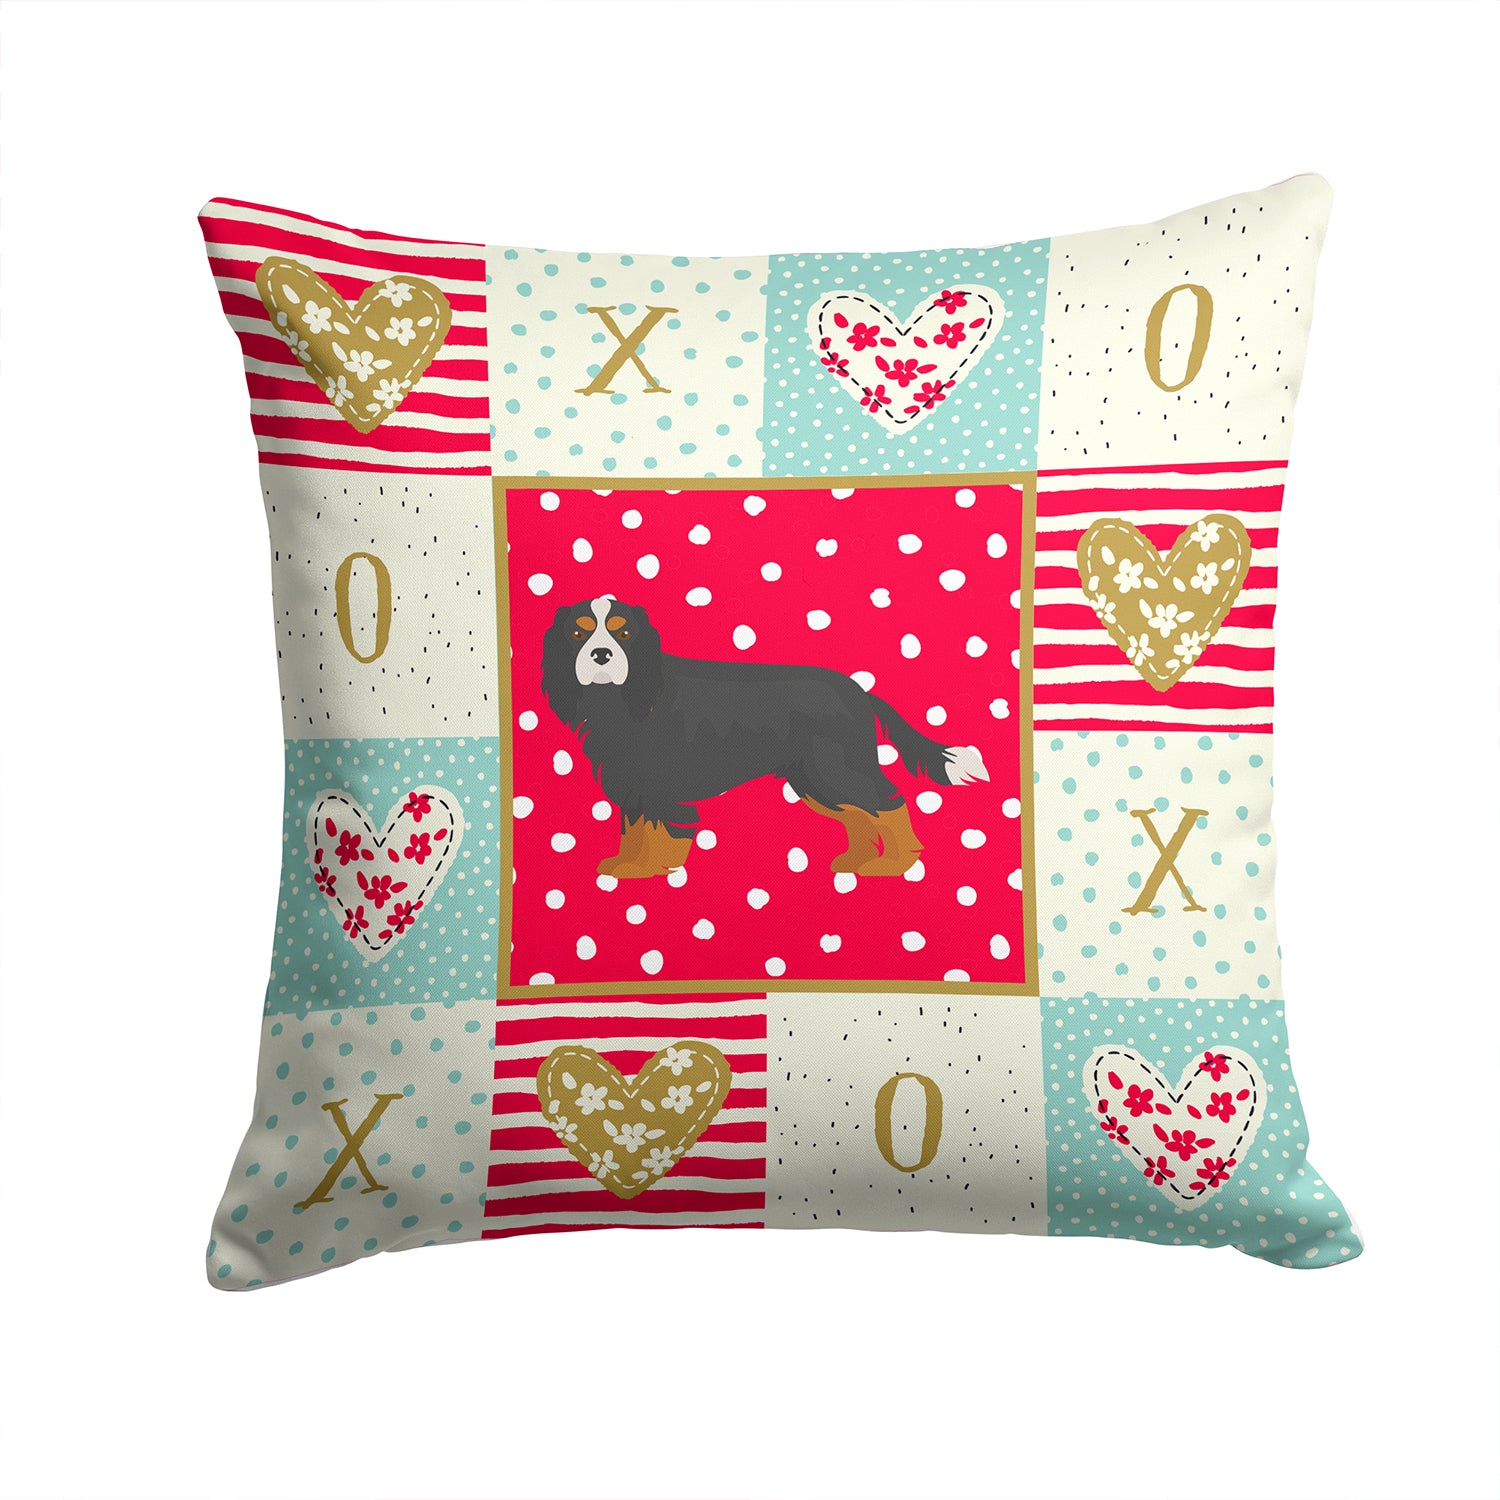 Cavalier King Charles Spaniel Love Fabric Decorative Pillow CK5819PW1414 - the-store.com